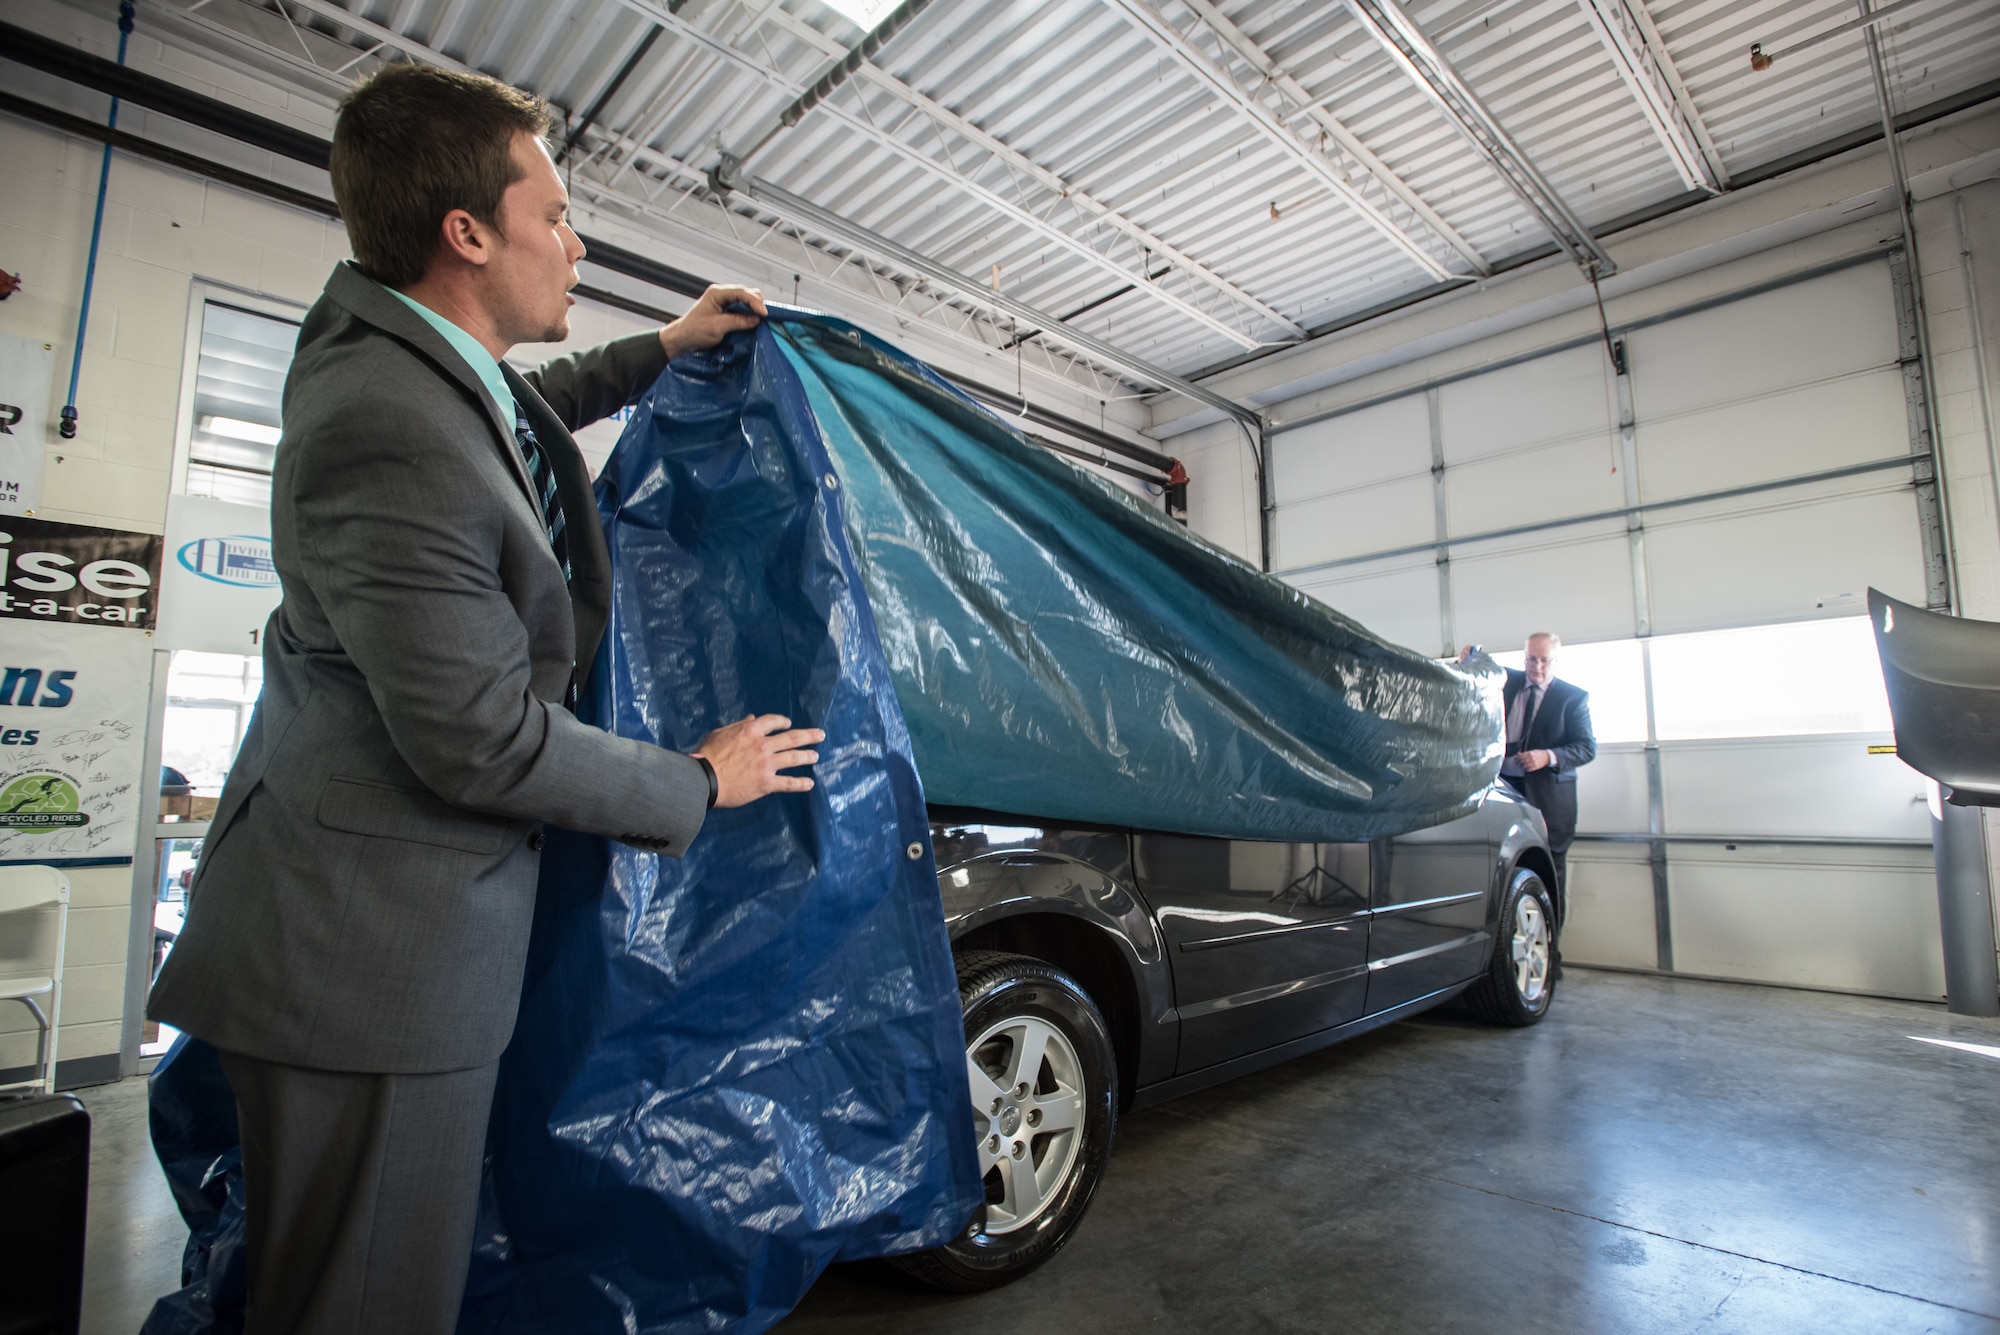 Jeff Lemr (left), manager of Oxmoor Collision Center, and Del Farmer, chief operating officer of Oxmoor Auto Group, unveil a restored Dodge Caravan at Oxmoor Collision in Louisville, Ky., Nov. 20, 2015. The van was being donated to Staff Sgt. Neil Goodlin, a fire team member in the Kentucky Air National Guard’s 123rd Security Forces Squadron, as part of a program that restores wrecked vehicles to like-new condition before giving them to needy individuals. (U.S. Air National Guard photo by Maj. Dale Greer)